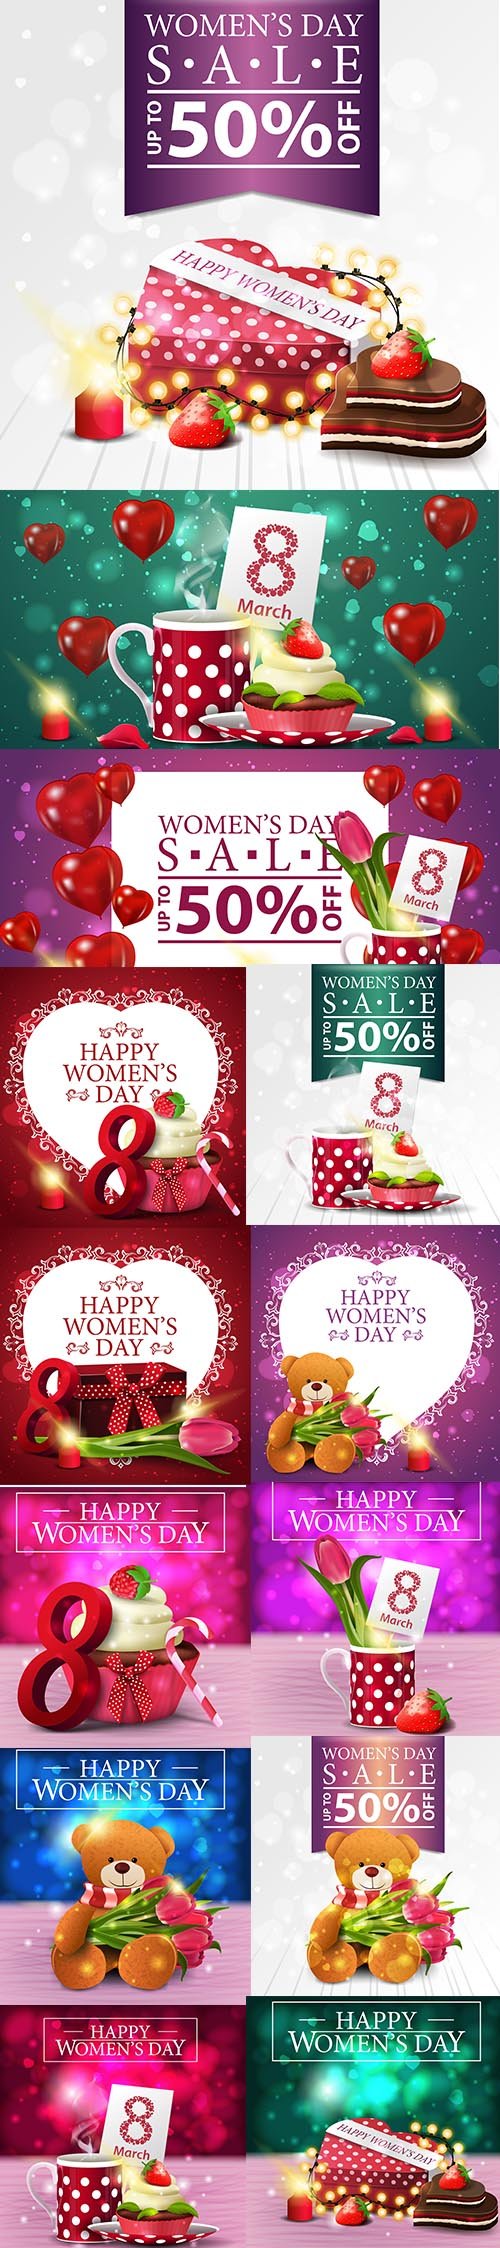 Set of Womens Day Sale Illustrations